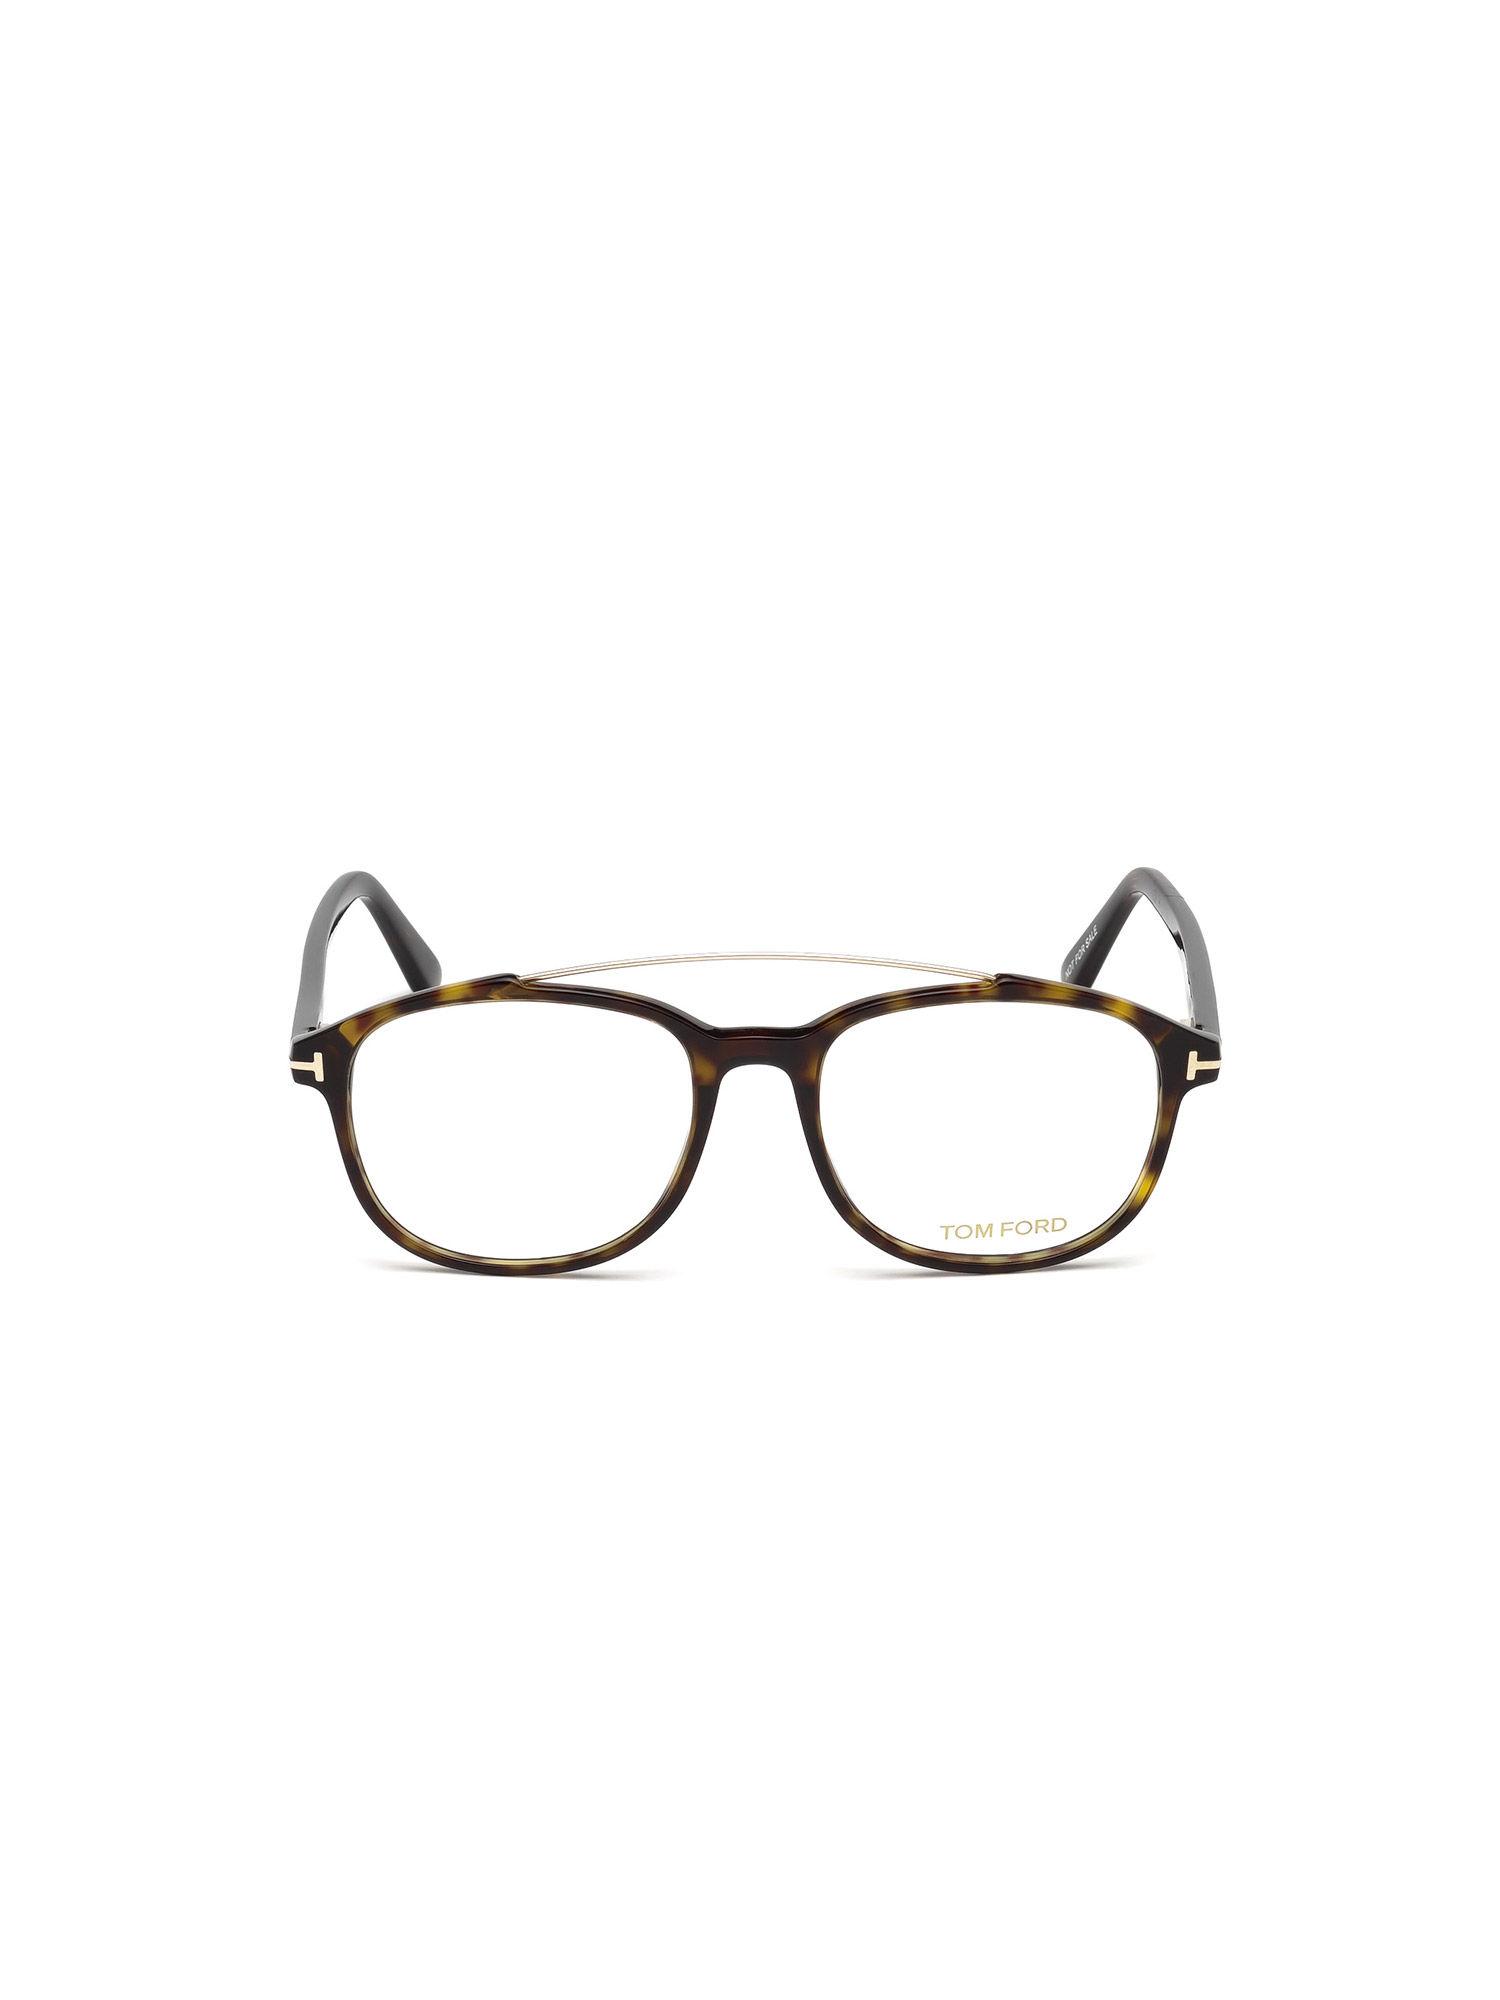 Ft5454 52 052 IS A Selection Of Iconic Square Shapes IN Premium Men Sunglasses